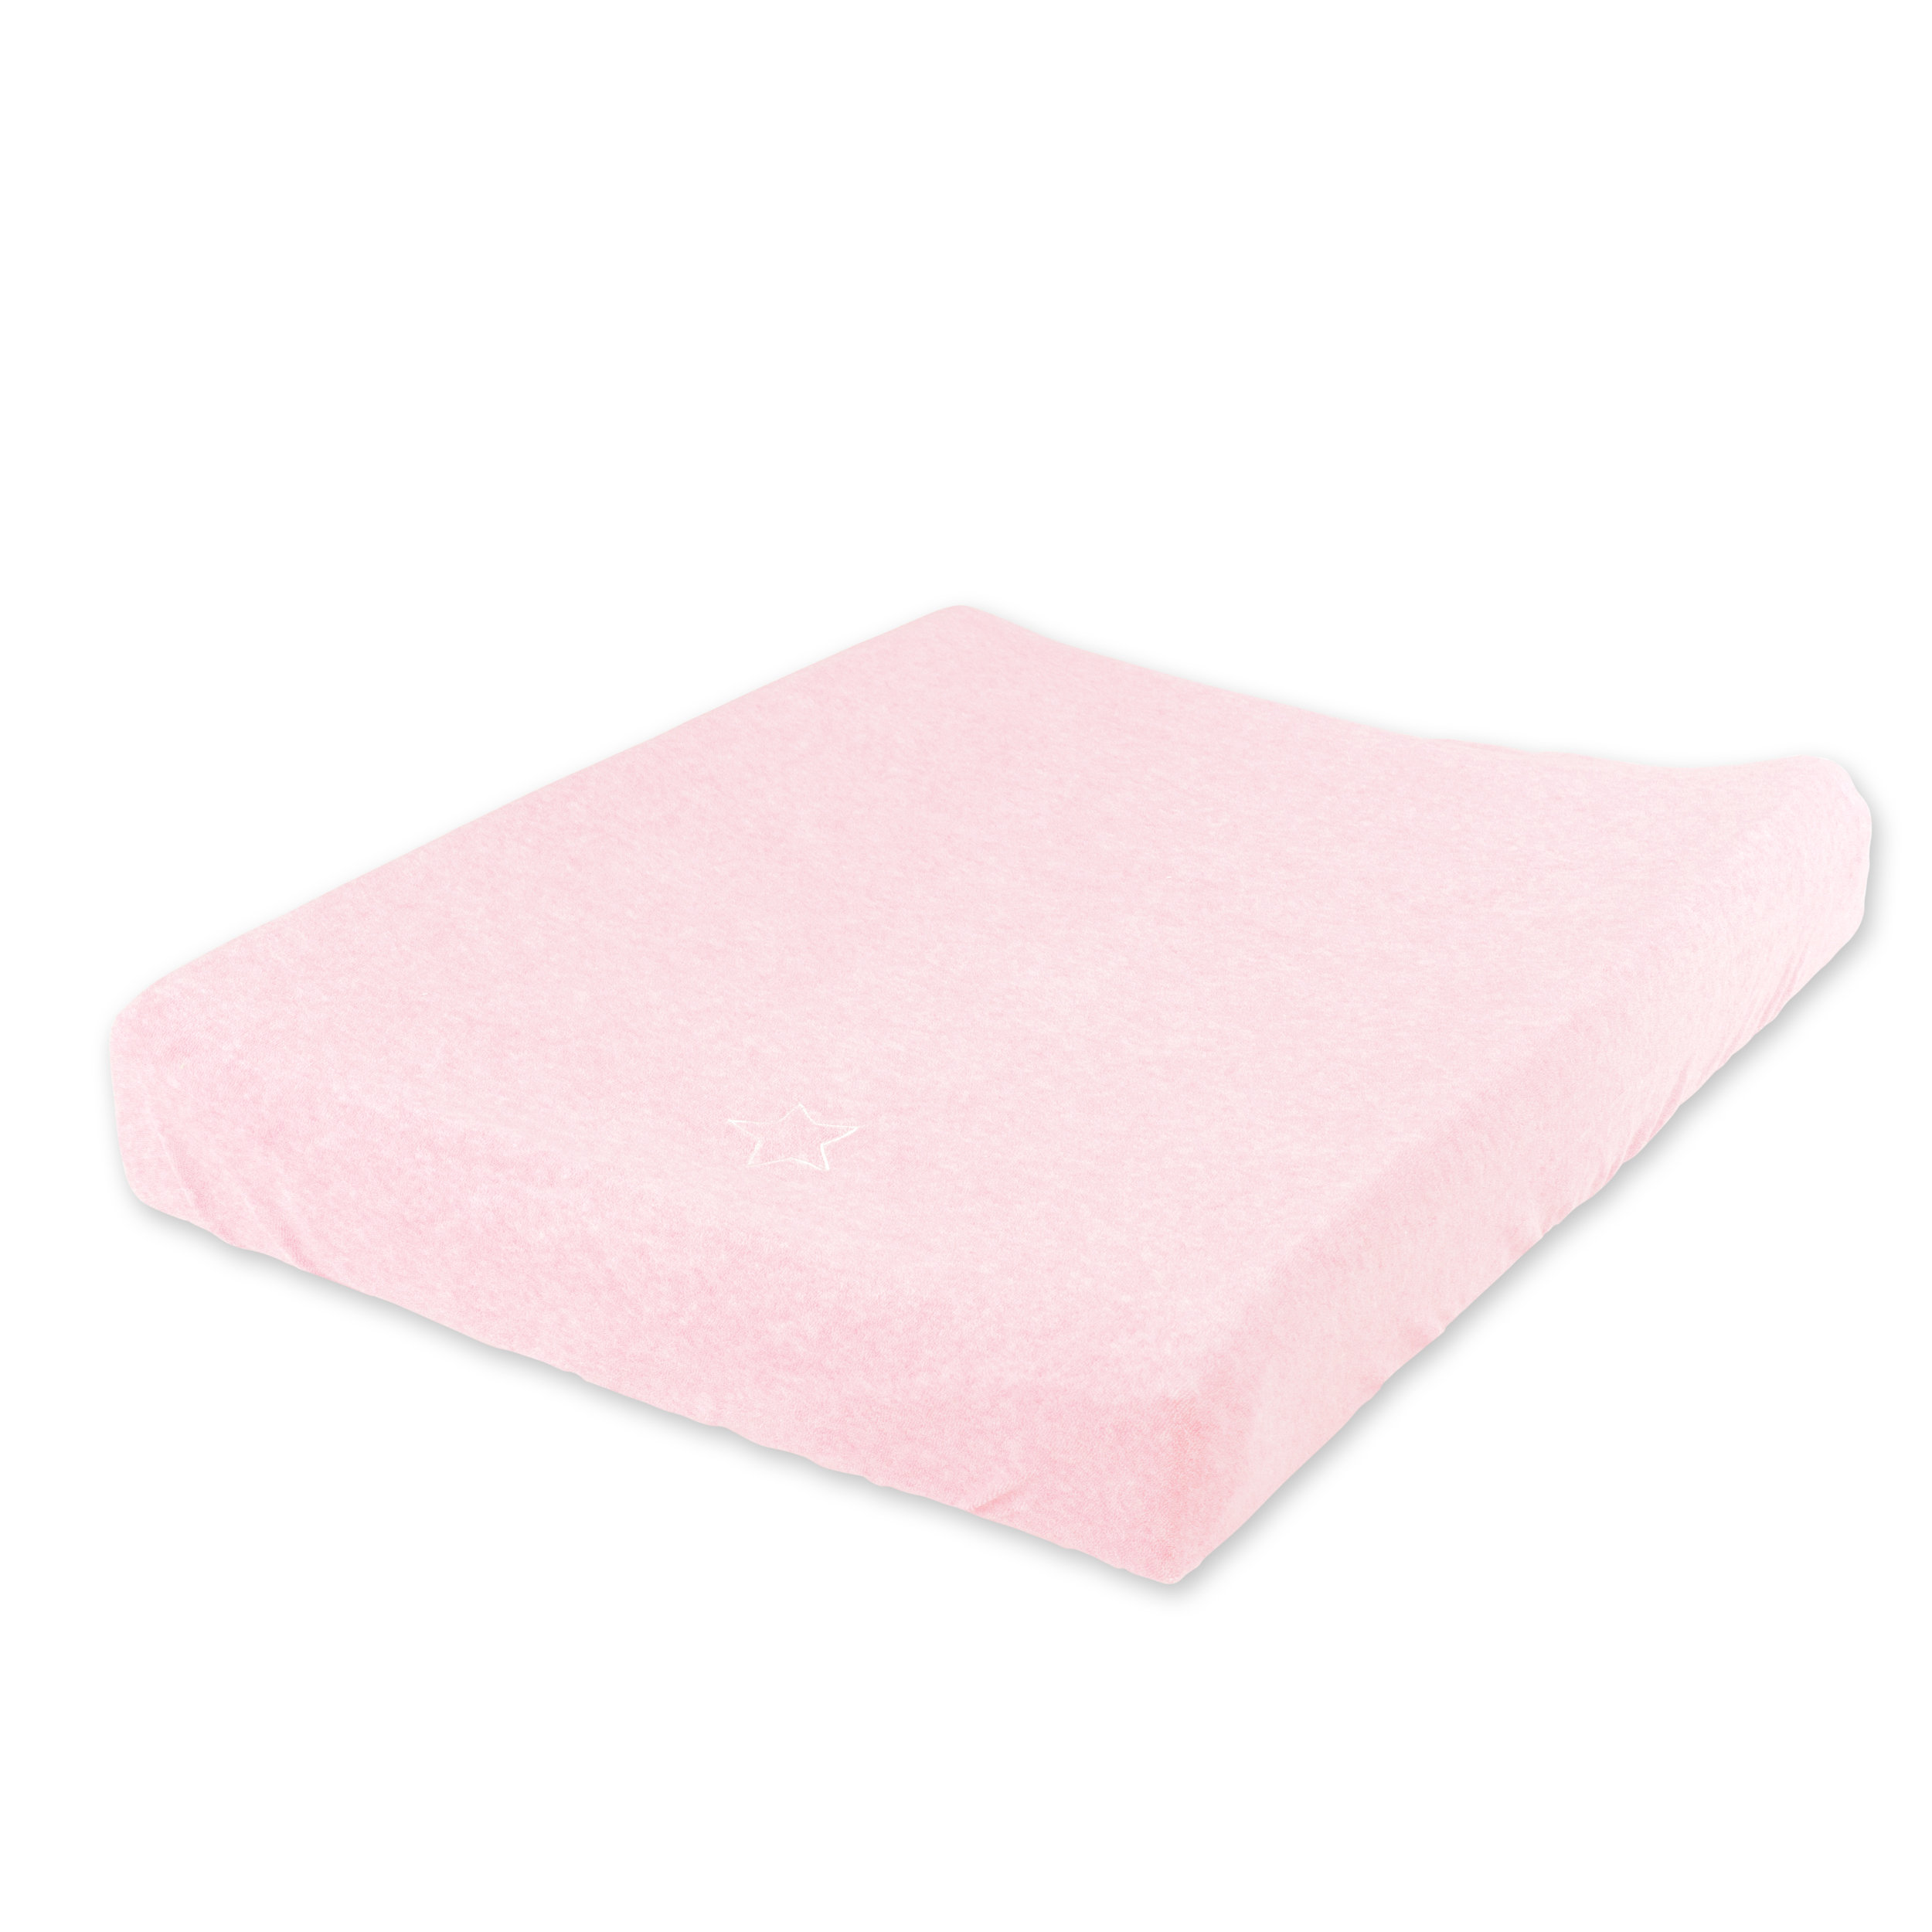 Changing mat cover Terry 50x75cm BEMINI Light pink marled